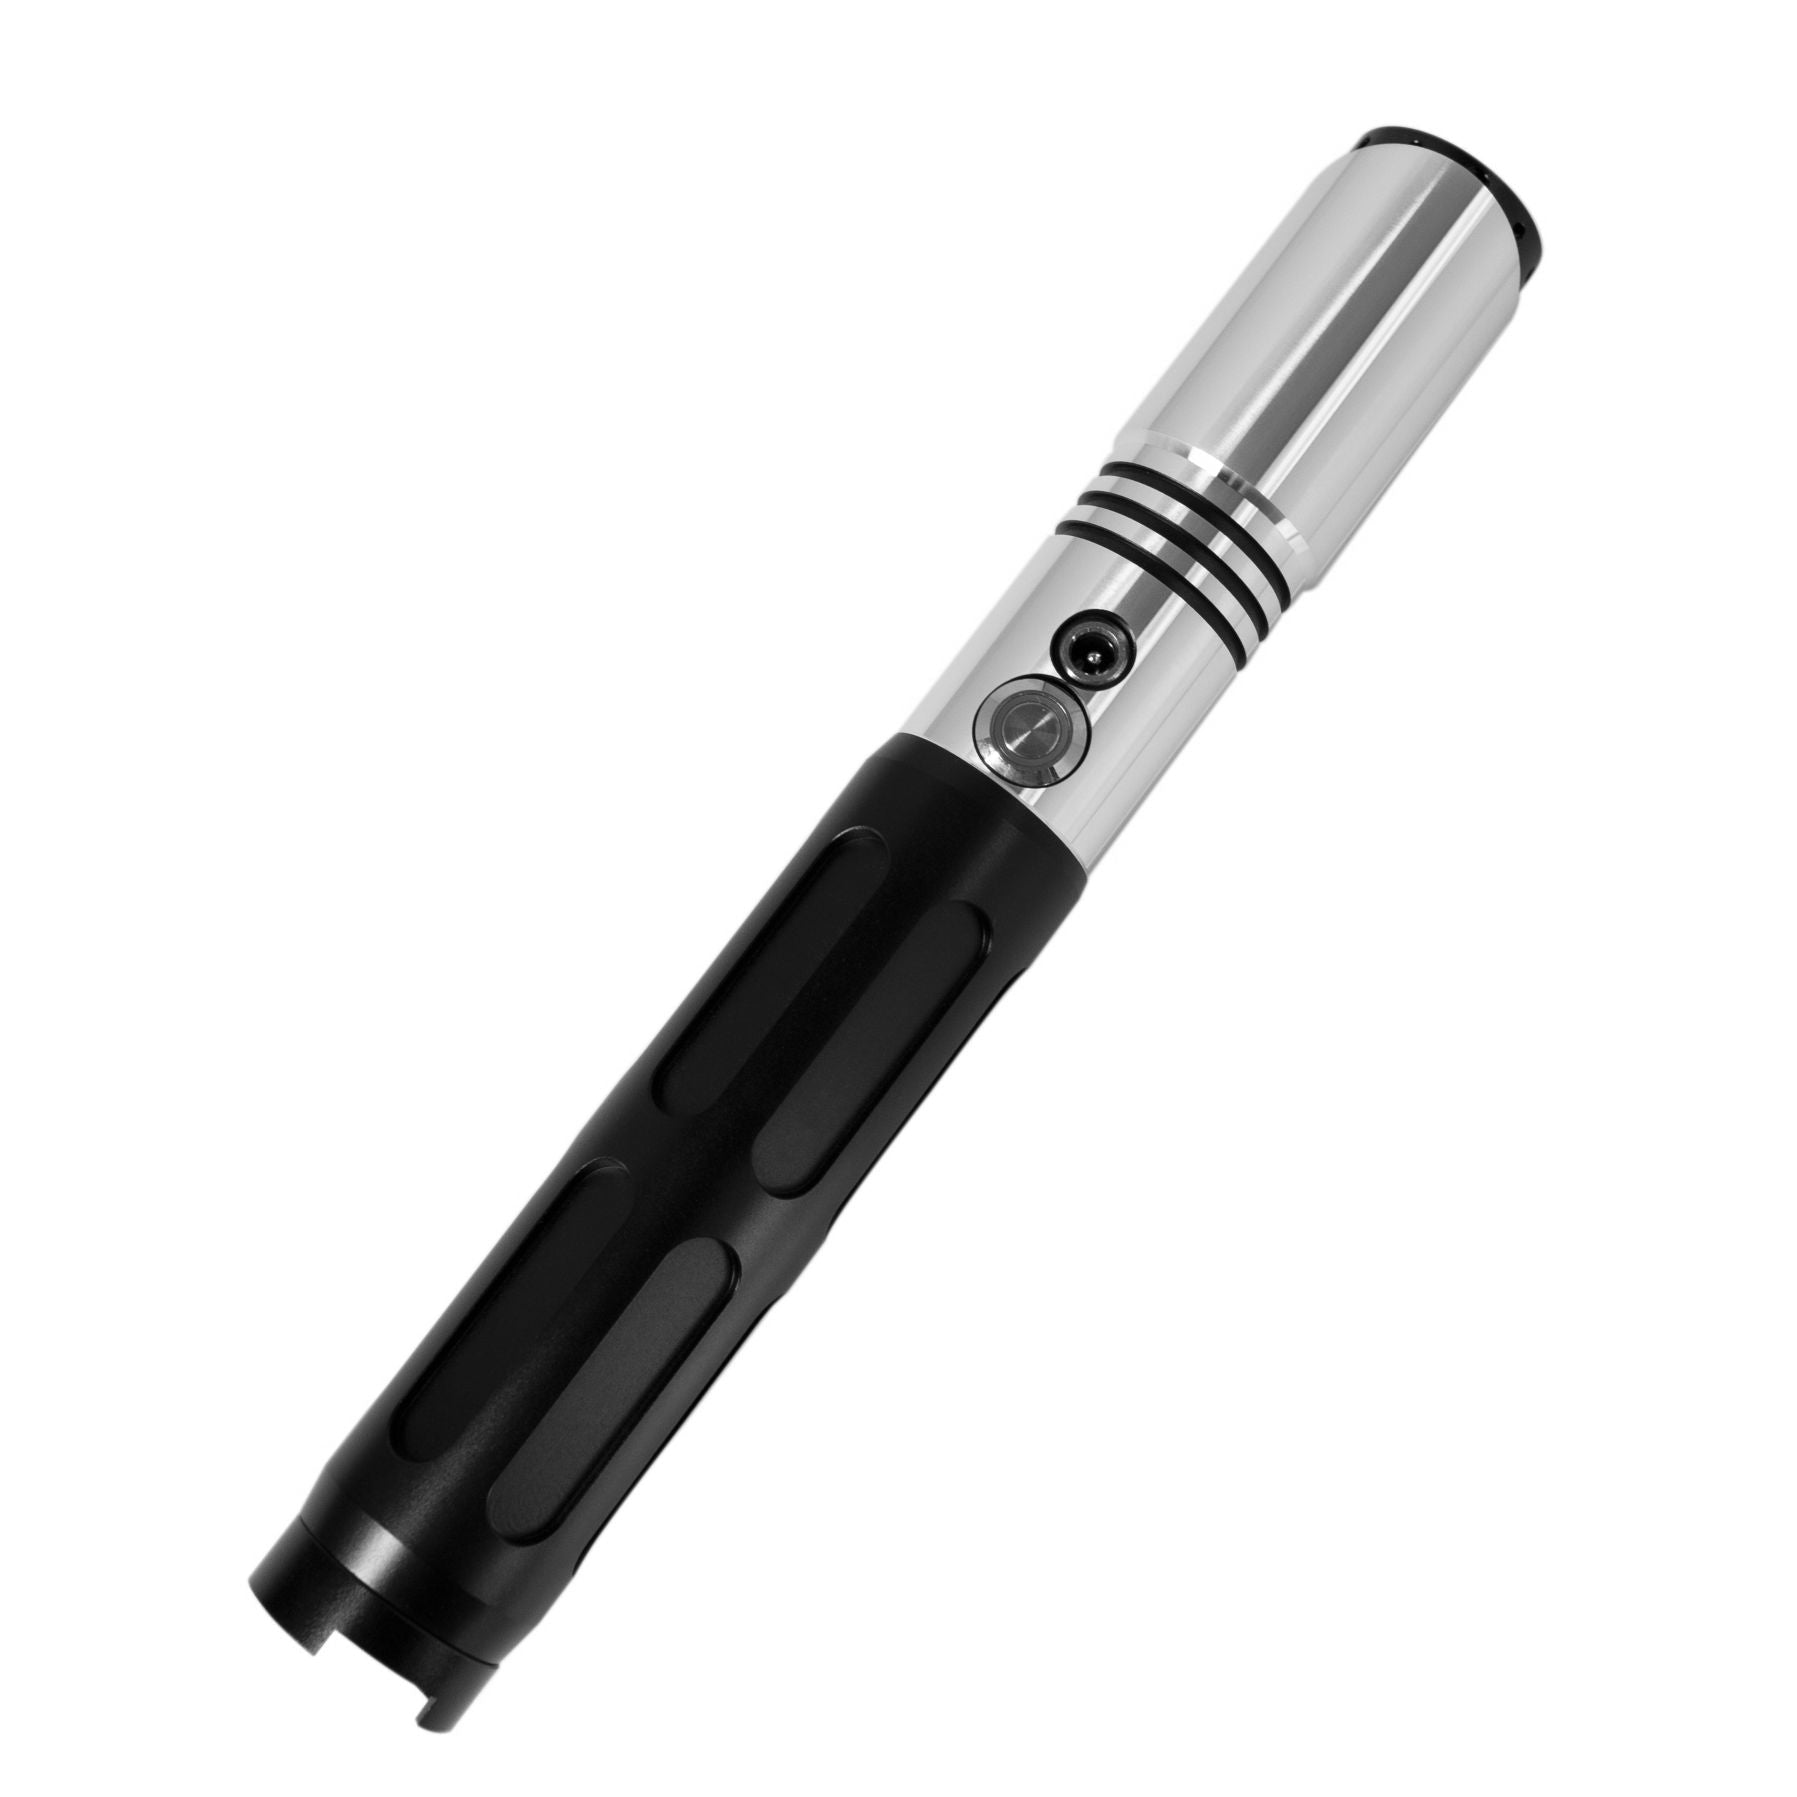 Tarbo Lightsaber Black and silver / RGB isabers